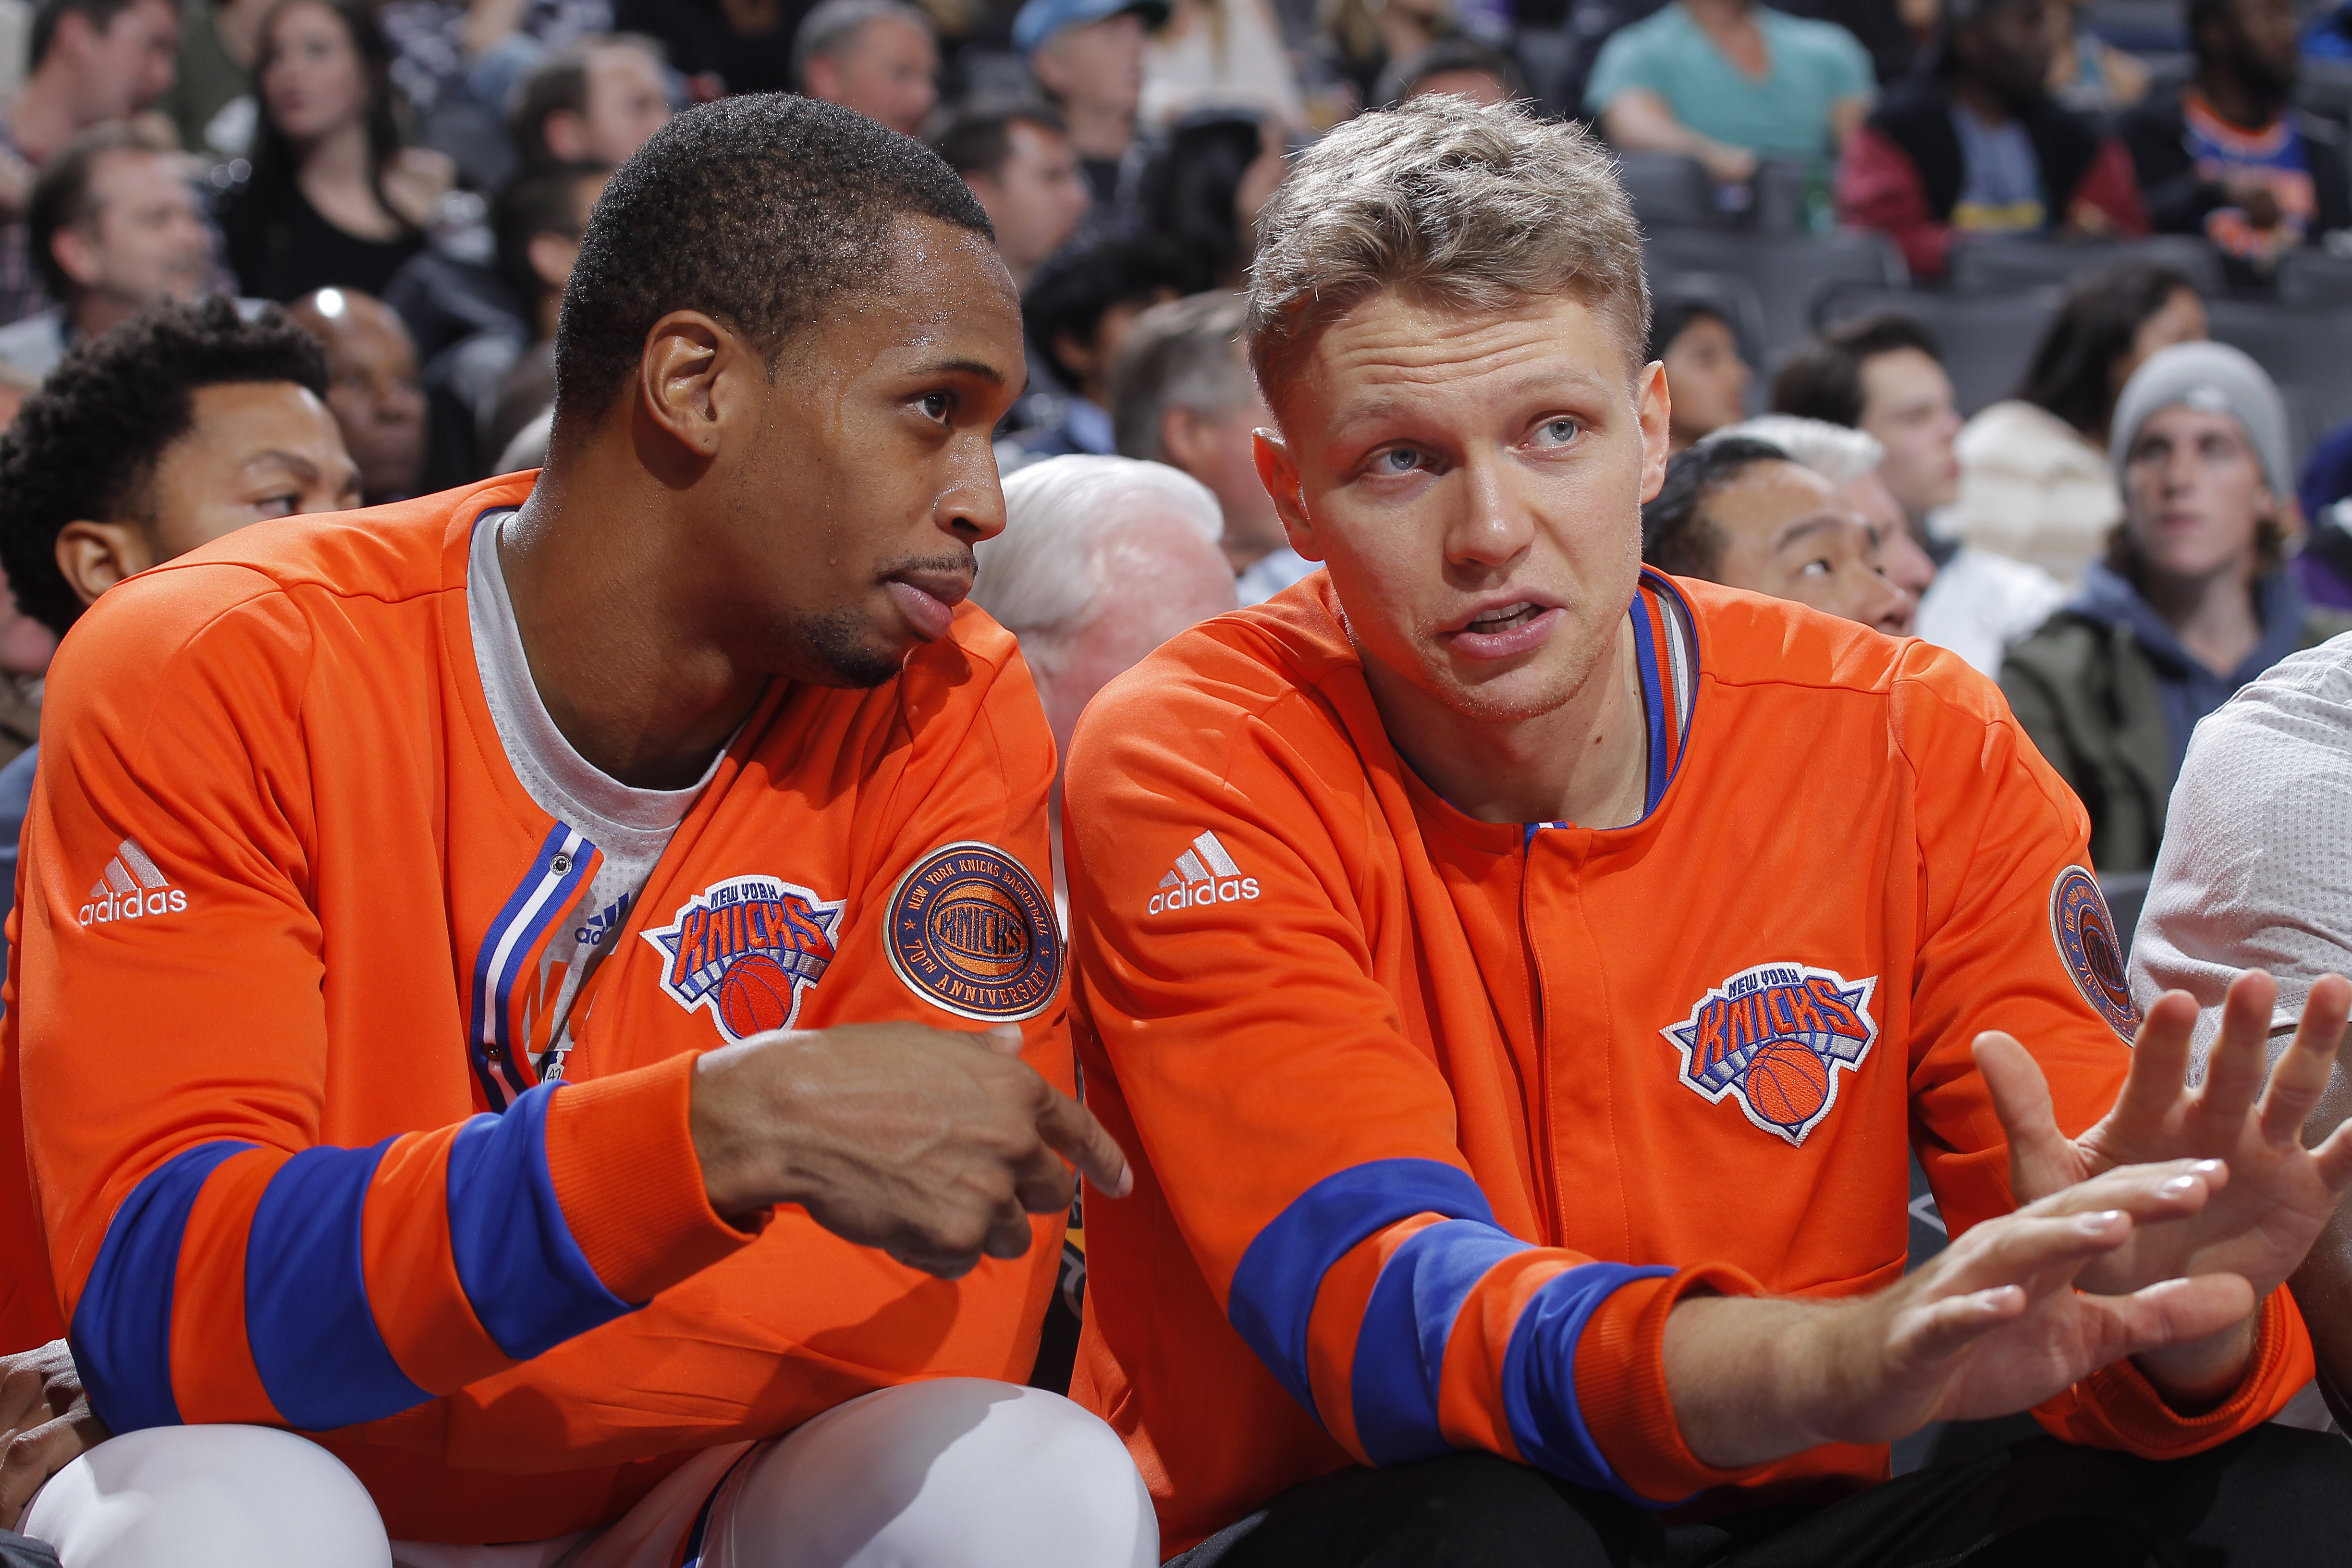 SACRAMENTO, CA - DECEMBER 9: Lance Thomas #42 and Mindaugas Kuzminskas #91 of the New York Knicks talk during the game against the Sacramento Kings on December 9, 2016 at Golden 1 Center in Sacramento, California. NOTE TO USER: User expressly acknowledges and agrees that, by downloading and or using this photograph, User is consenting to the terms and conditions of the Getty Images Agreement. Mandatory Copyright Notice: Copyright 2016 NBAE (Photo by Rocky Widner/NBAE via Getty Images)